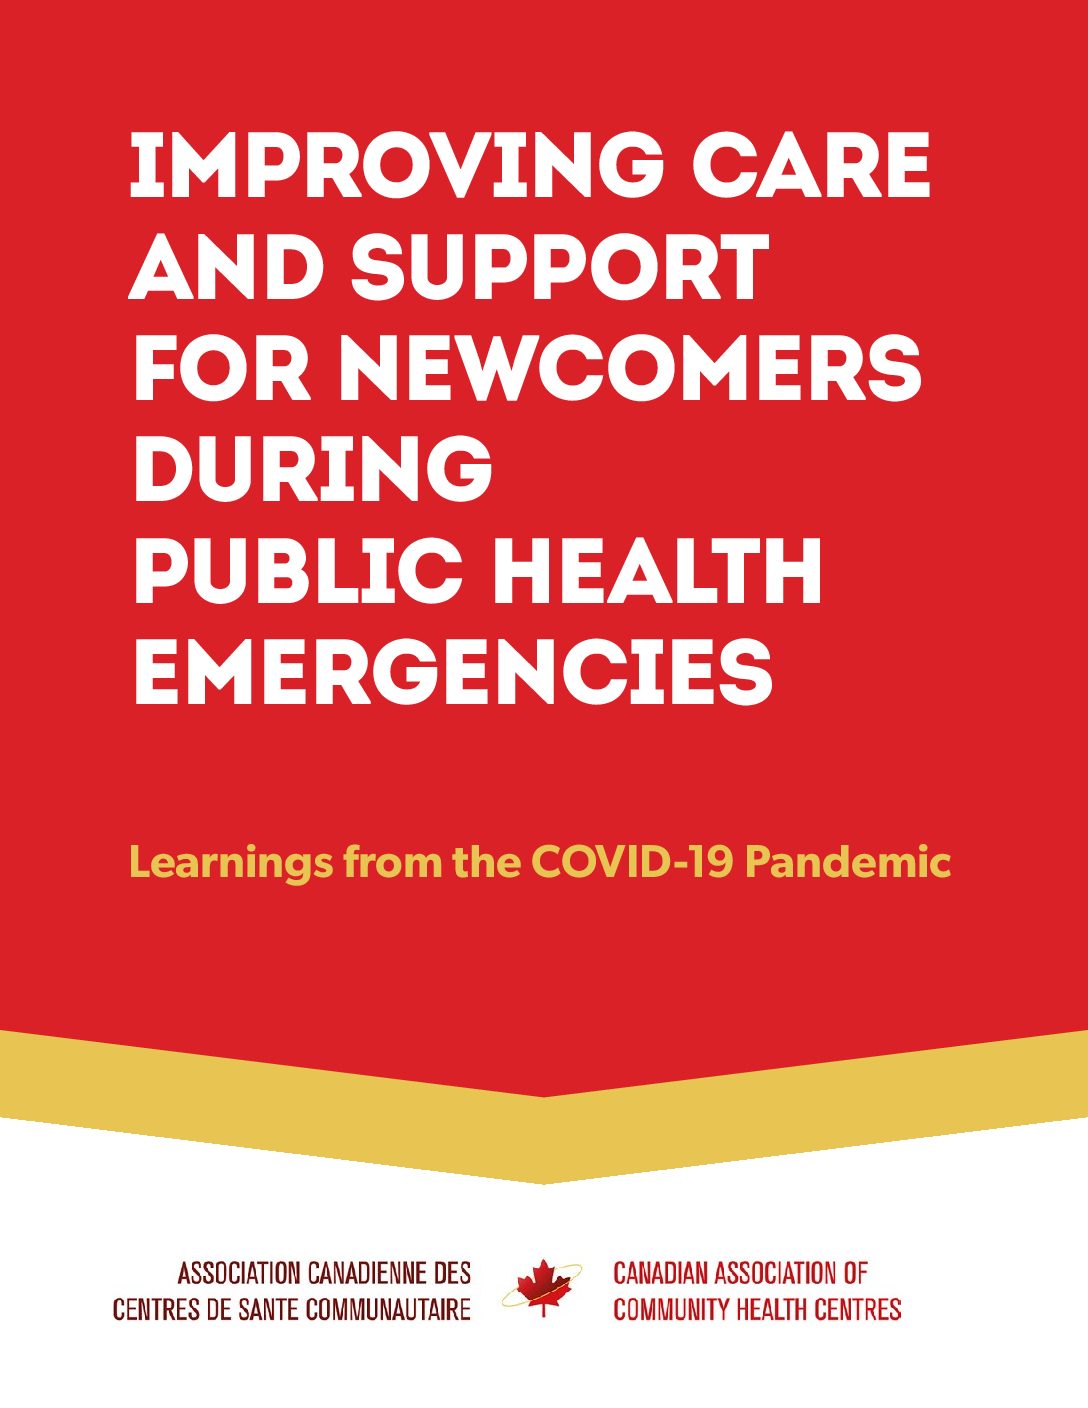 Improving Care and Support for Newcomers During Public Health Emergencies: Learnings from the COVID-19 Pandemic